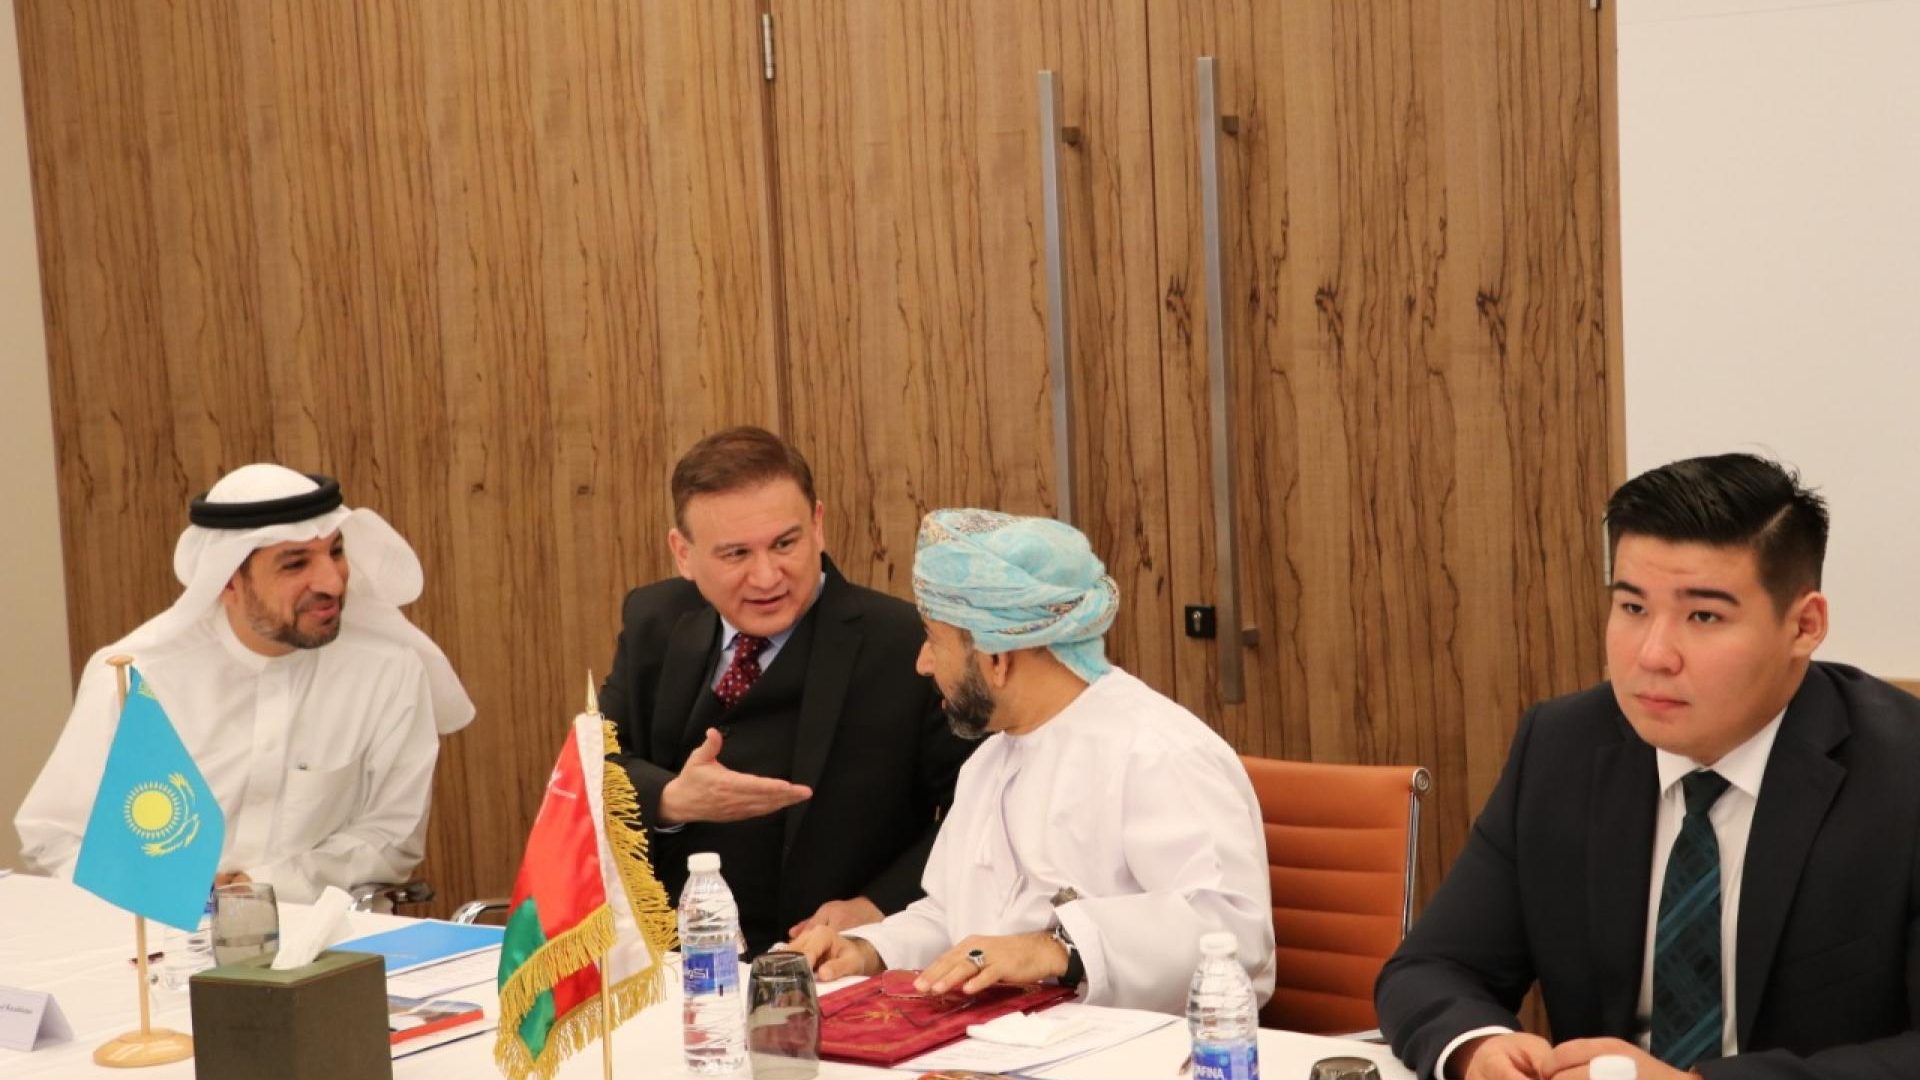 Kazakhstan’s tourism potential presented in Oman for the first time